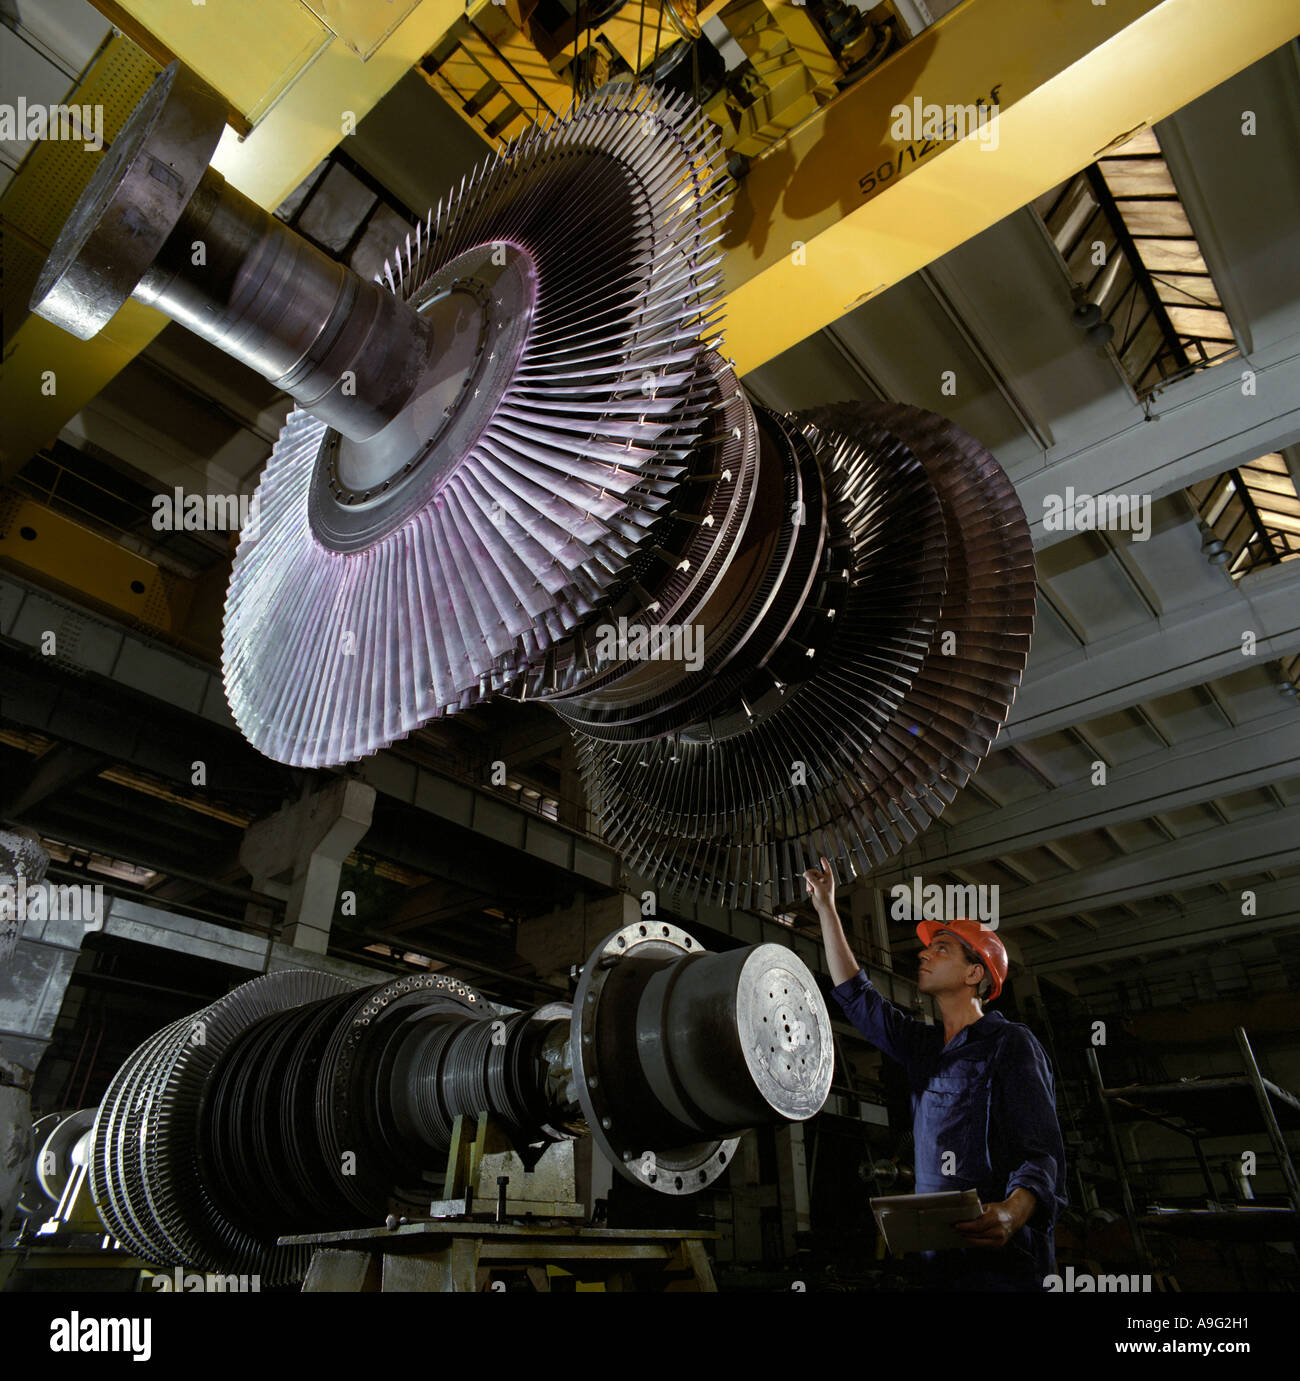 Manufacture of aircraft engine, Romania Stock Photo